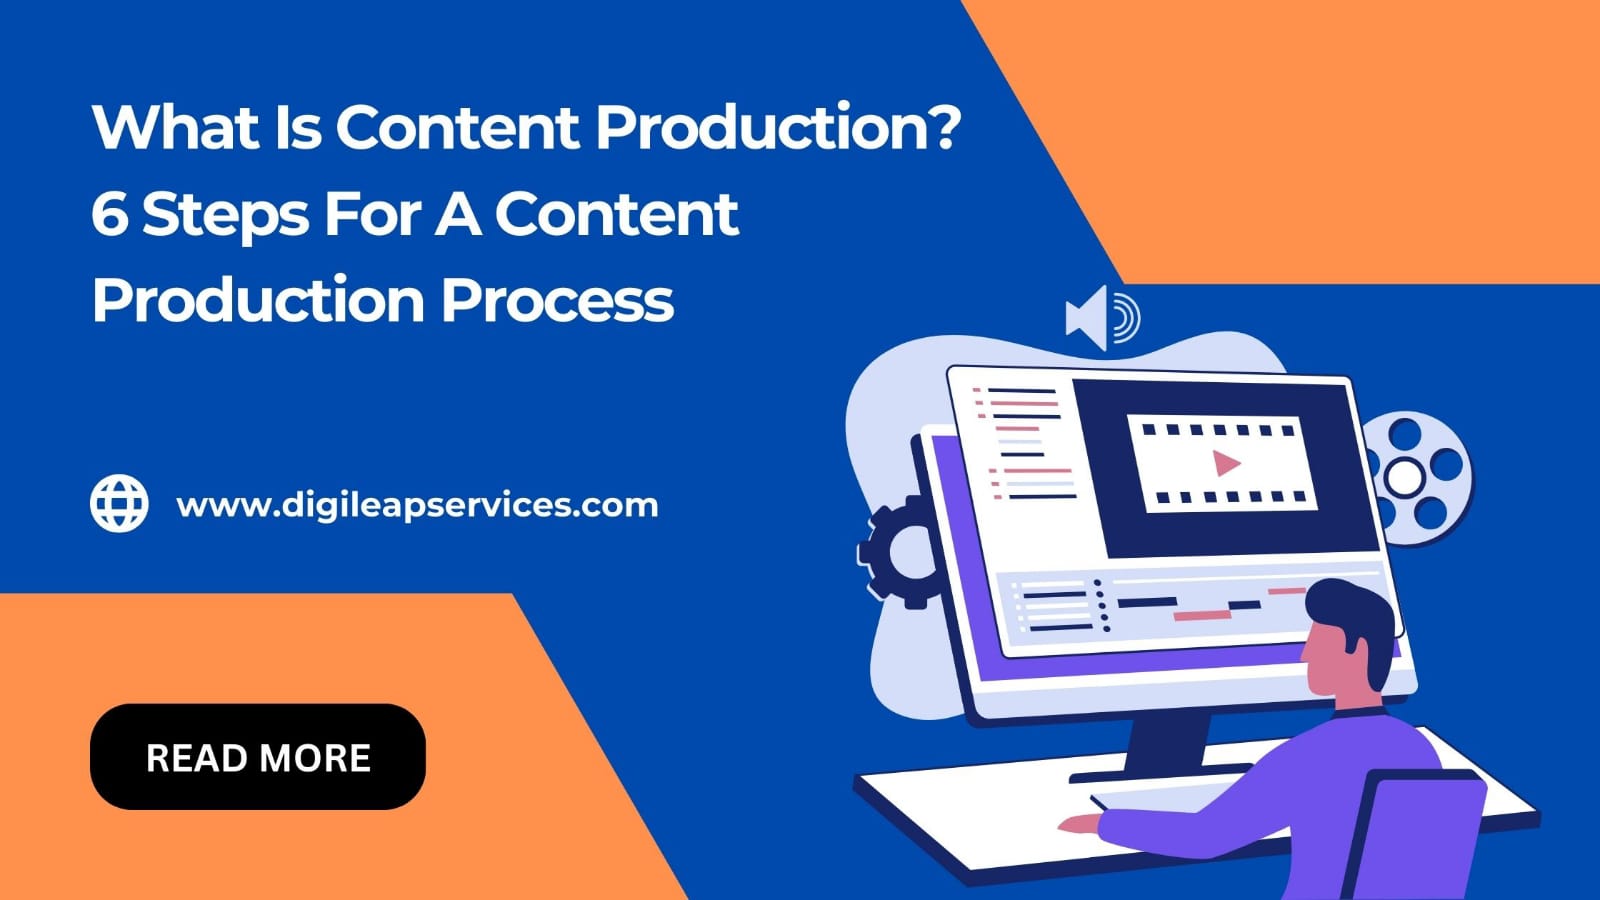 What Is Content Production? 6 Steps For A Content Production Process